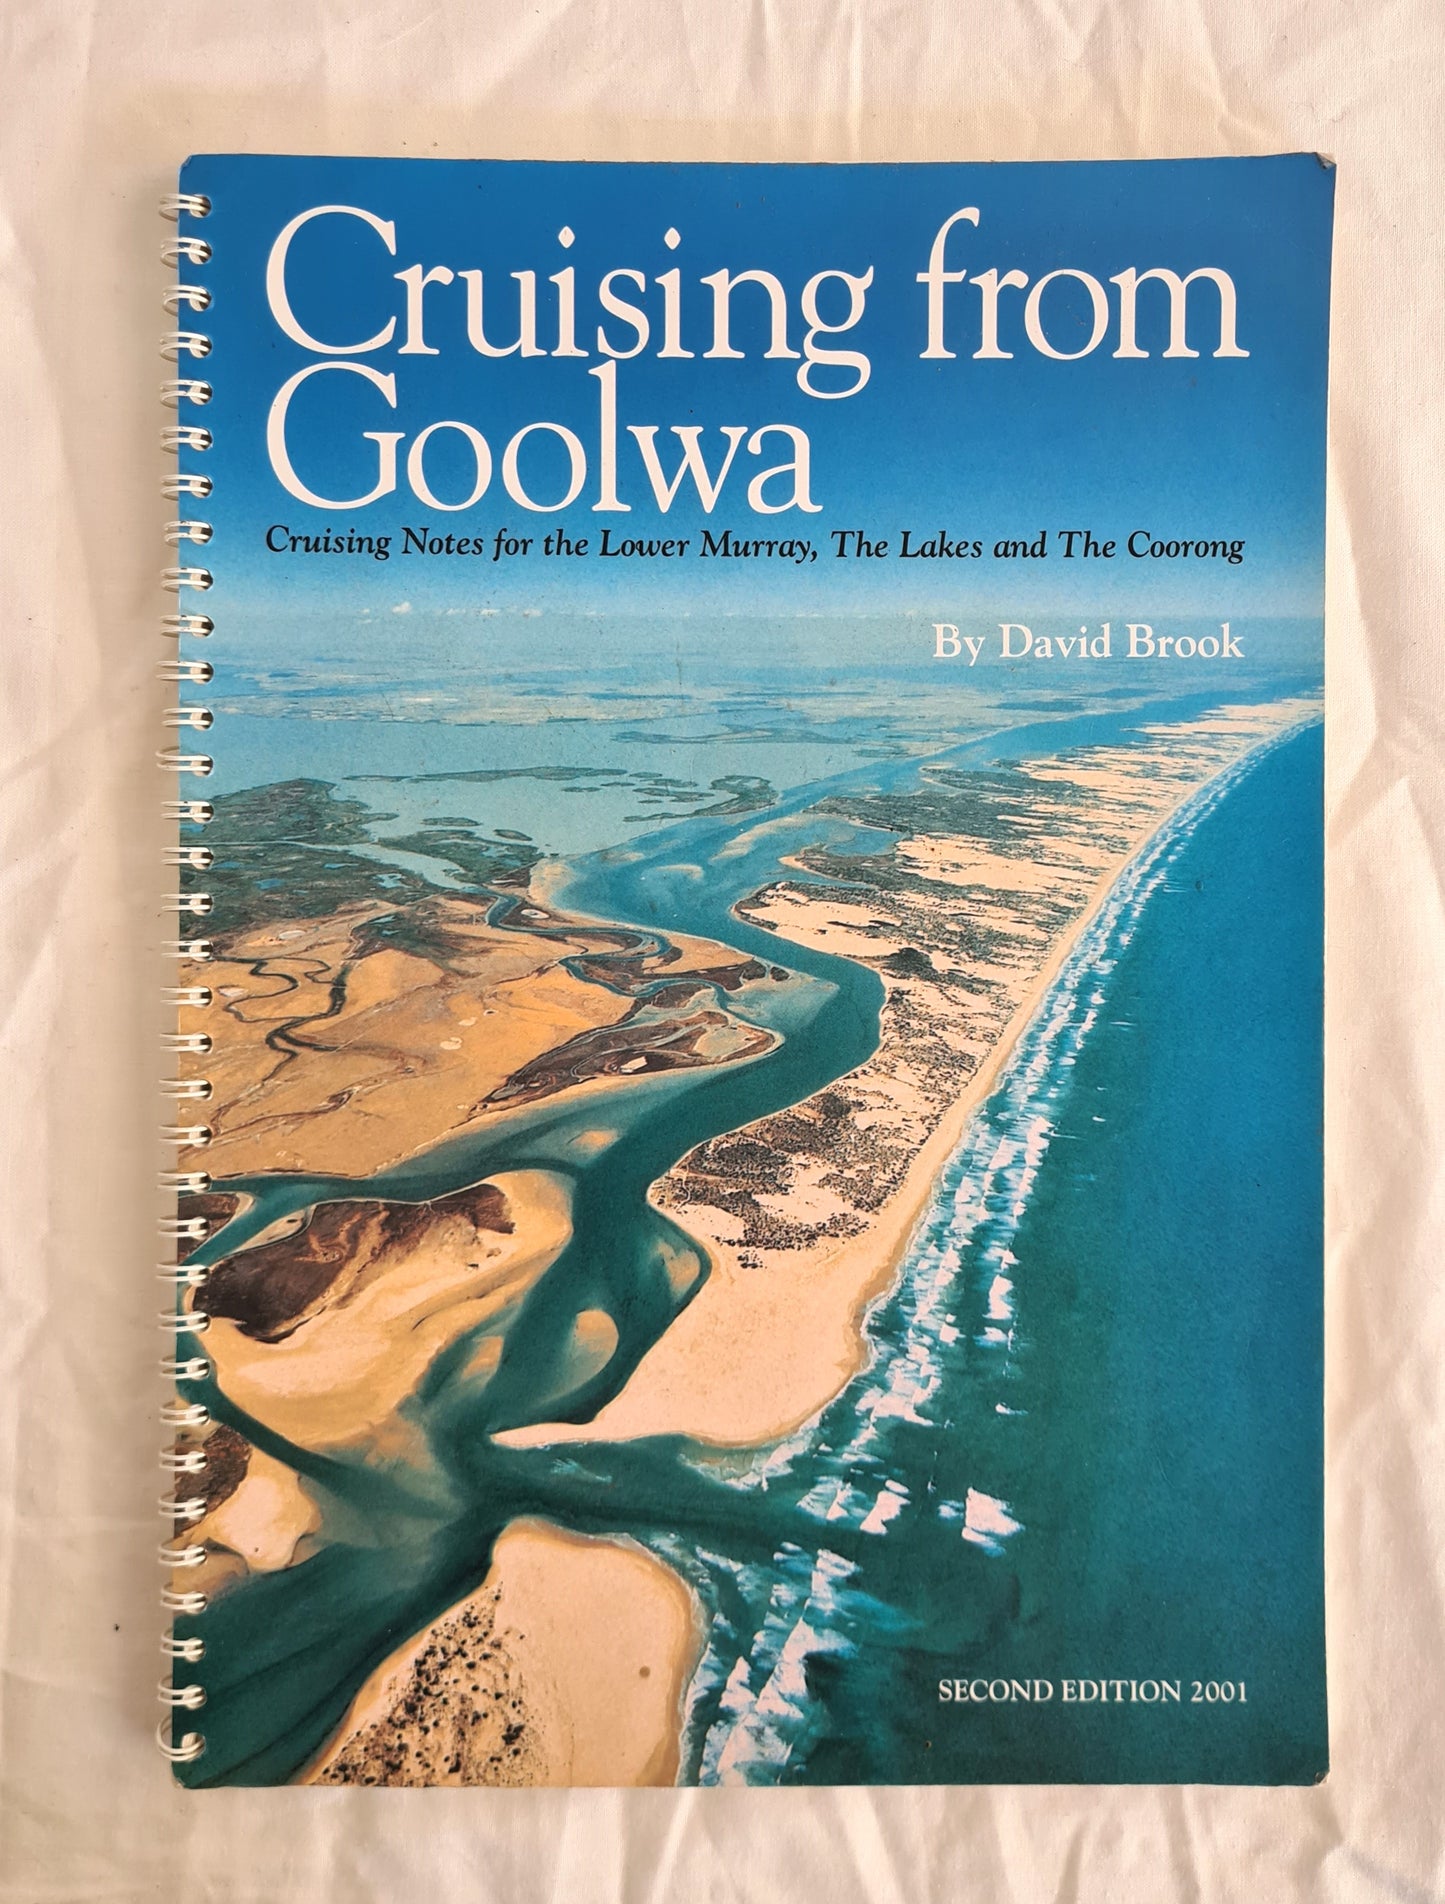 Cruising From Goolwa  Cruising Notes for the Lower Murray, The Lakes and The Coorong  by David Brook